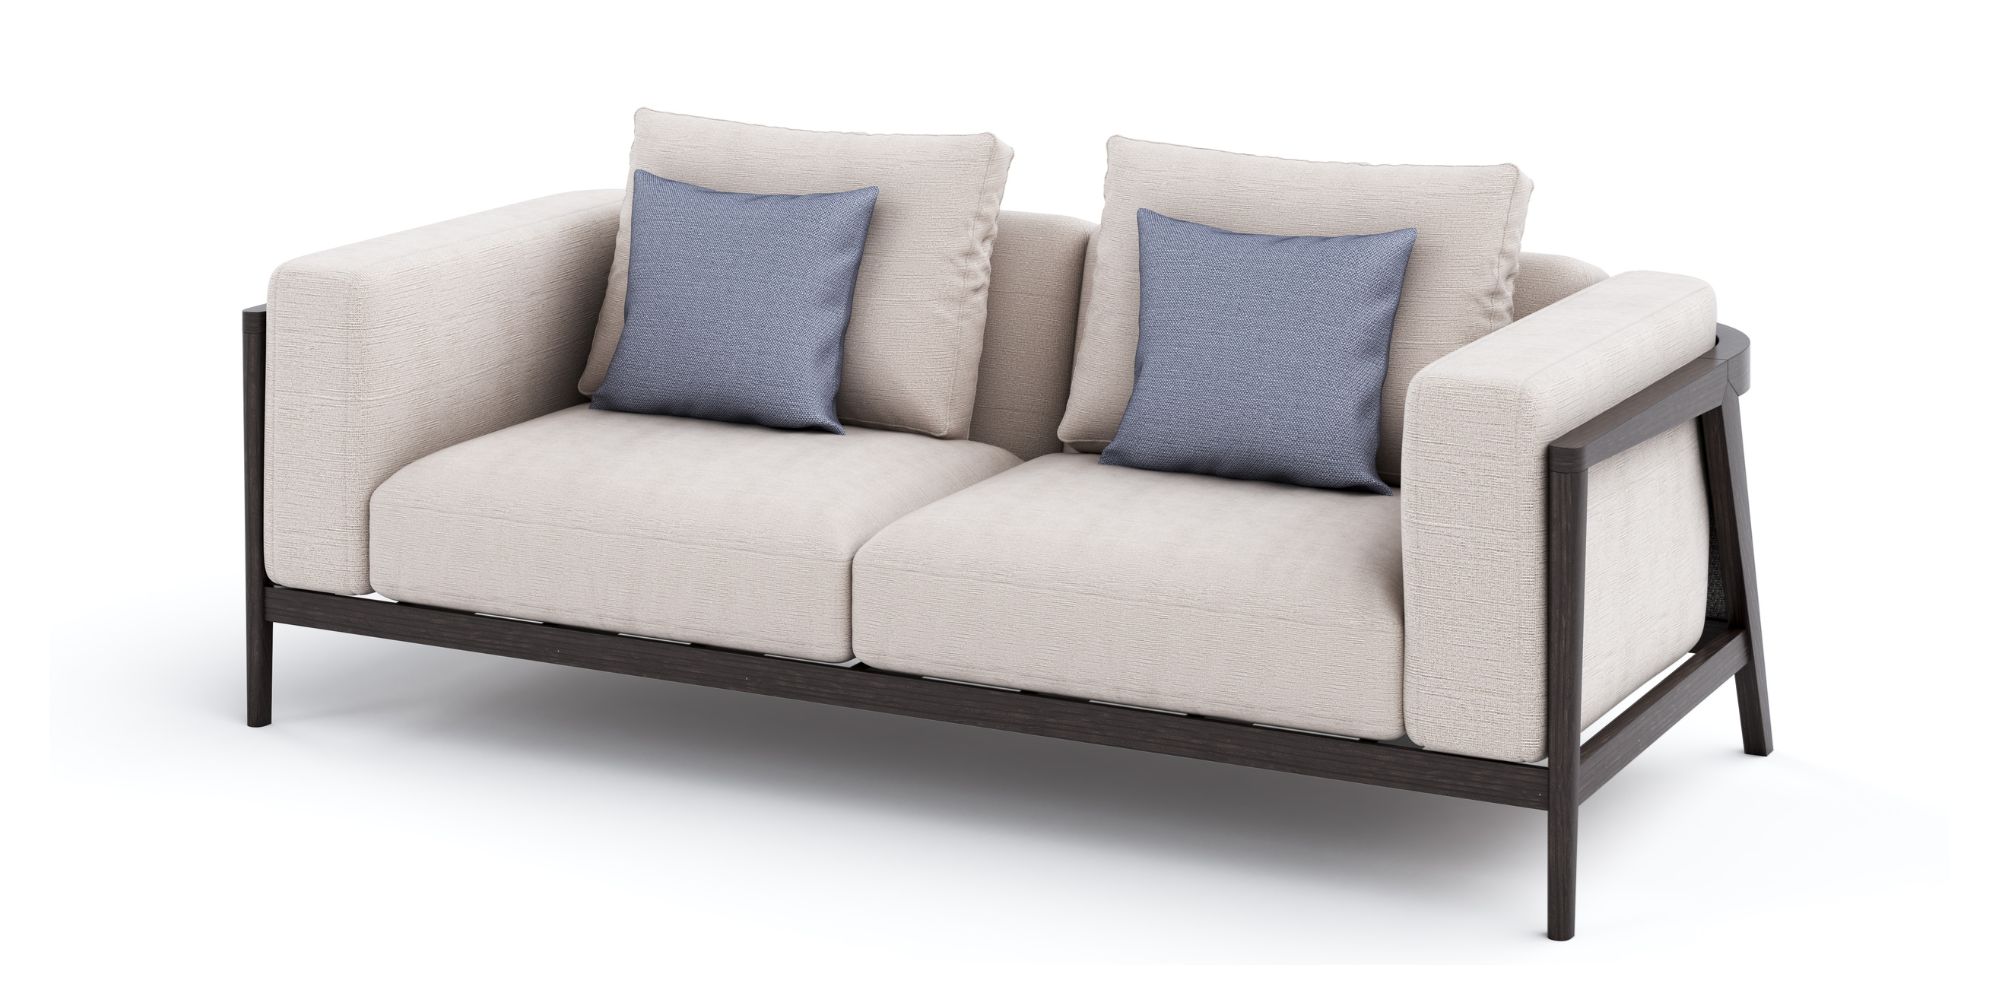 Bolgheri Sofa Unbuttoned in Outdoor Sofas for Bolgheri collection